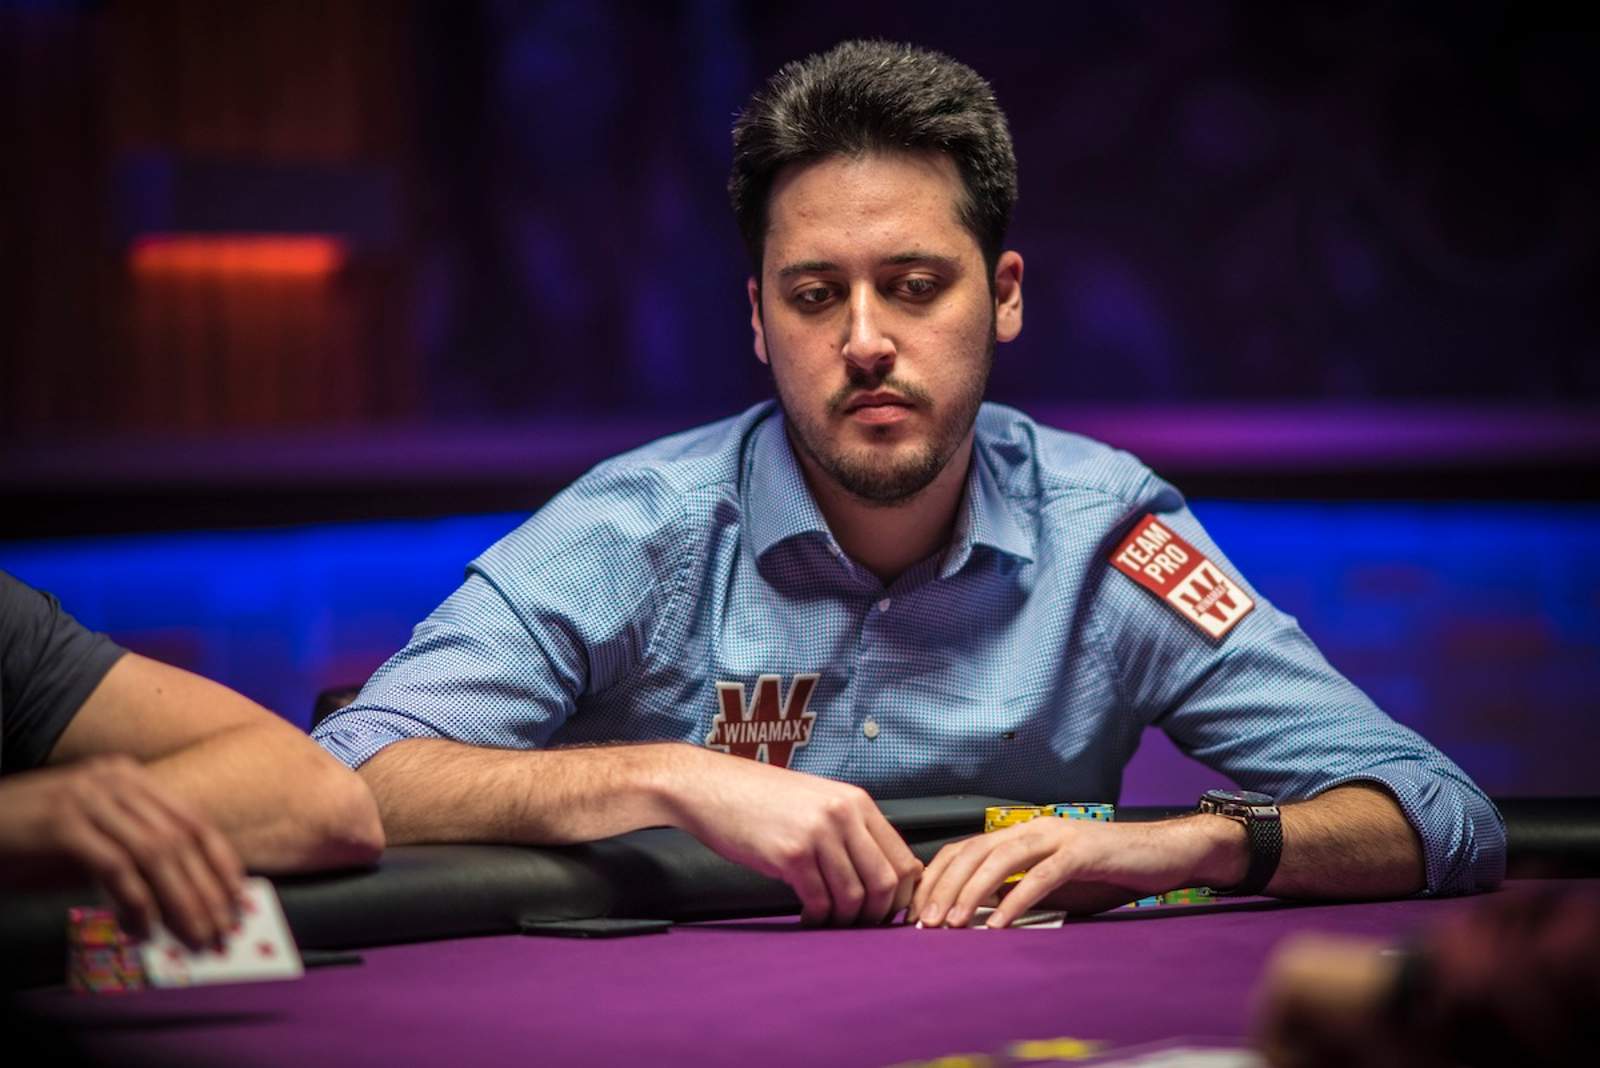 Every Detail Matters for Mateos in Super High Roller Bowl V